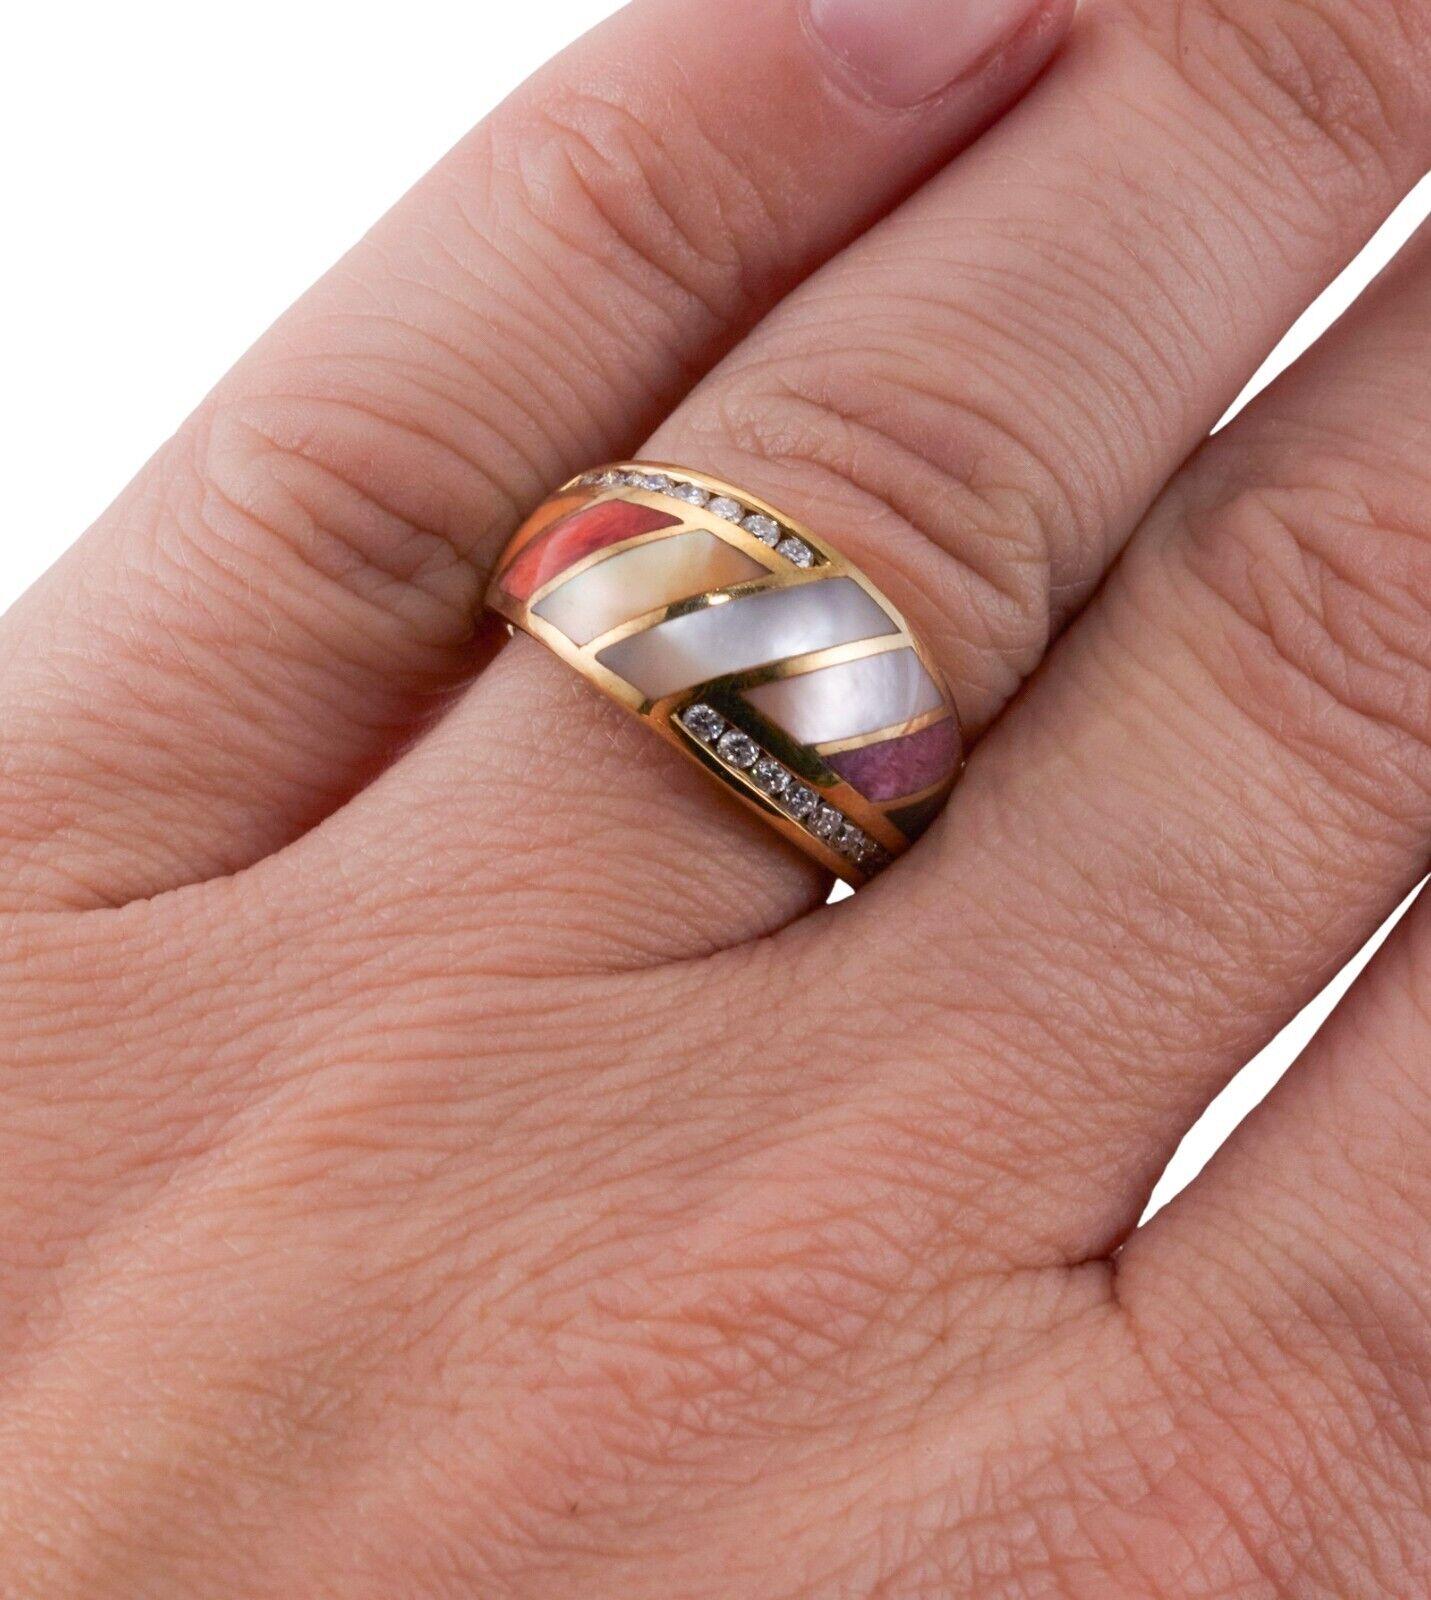 A 14k yellow gold ring set with mother-of-pearl, coral, purple sugilite and diamonds - approx. 0.16ctw. Ring Size 6.25, 10.5mm wide. 8 grams.